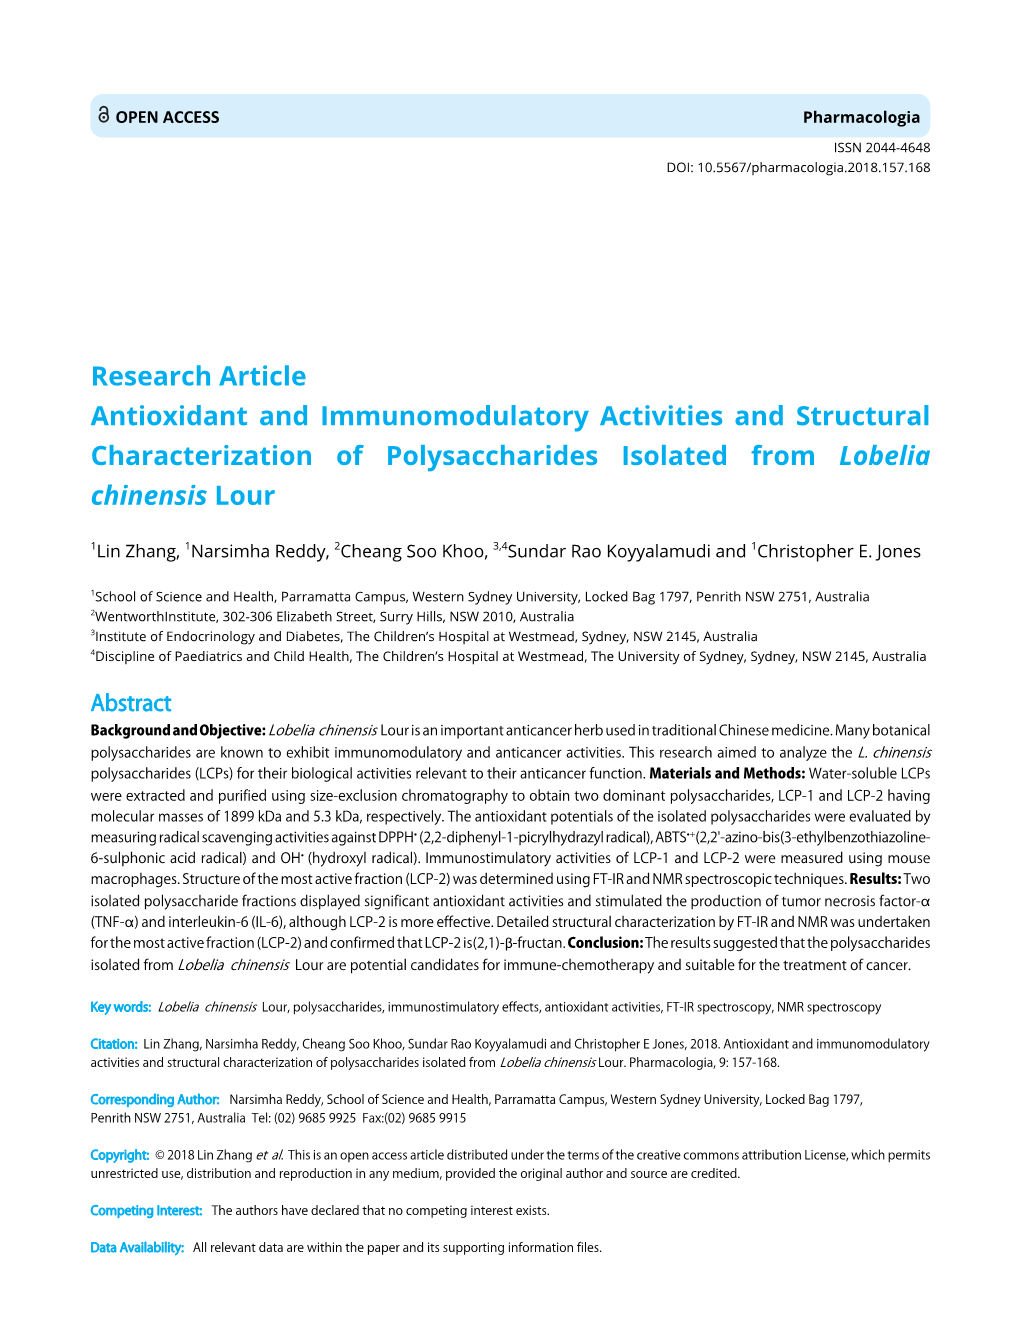 Antioxidant and Immunomodulatory Activities and Structural Characterization of Polysaccharides Isolated from Lobelia Chinensis Lour